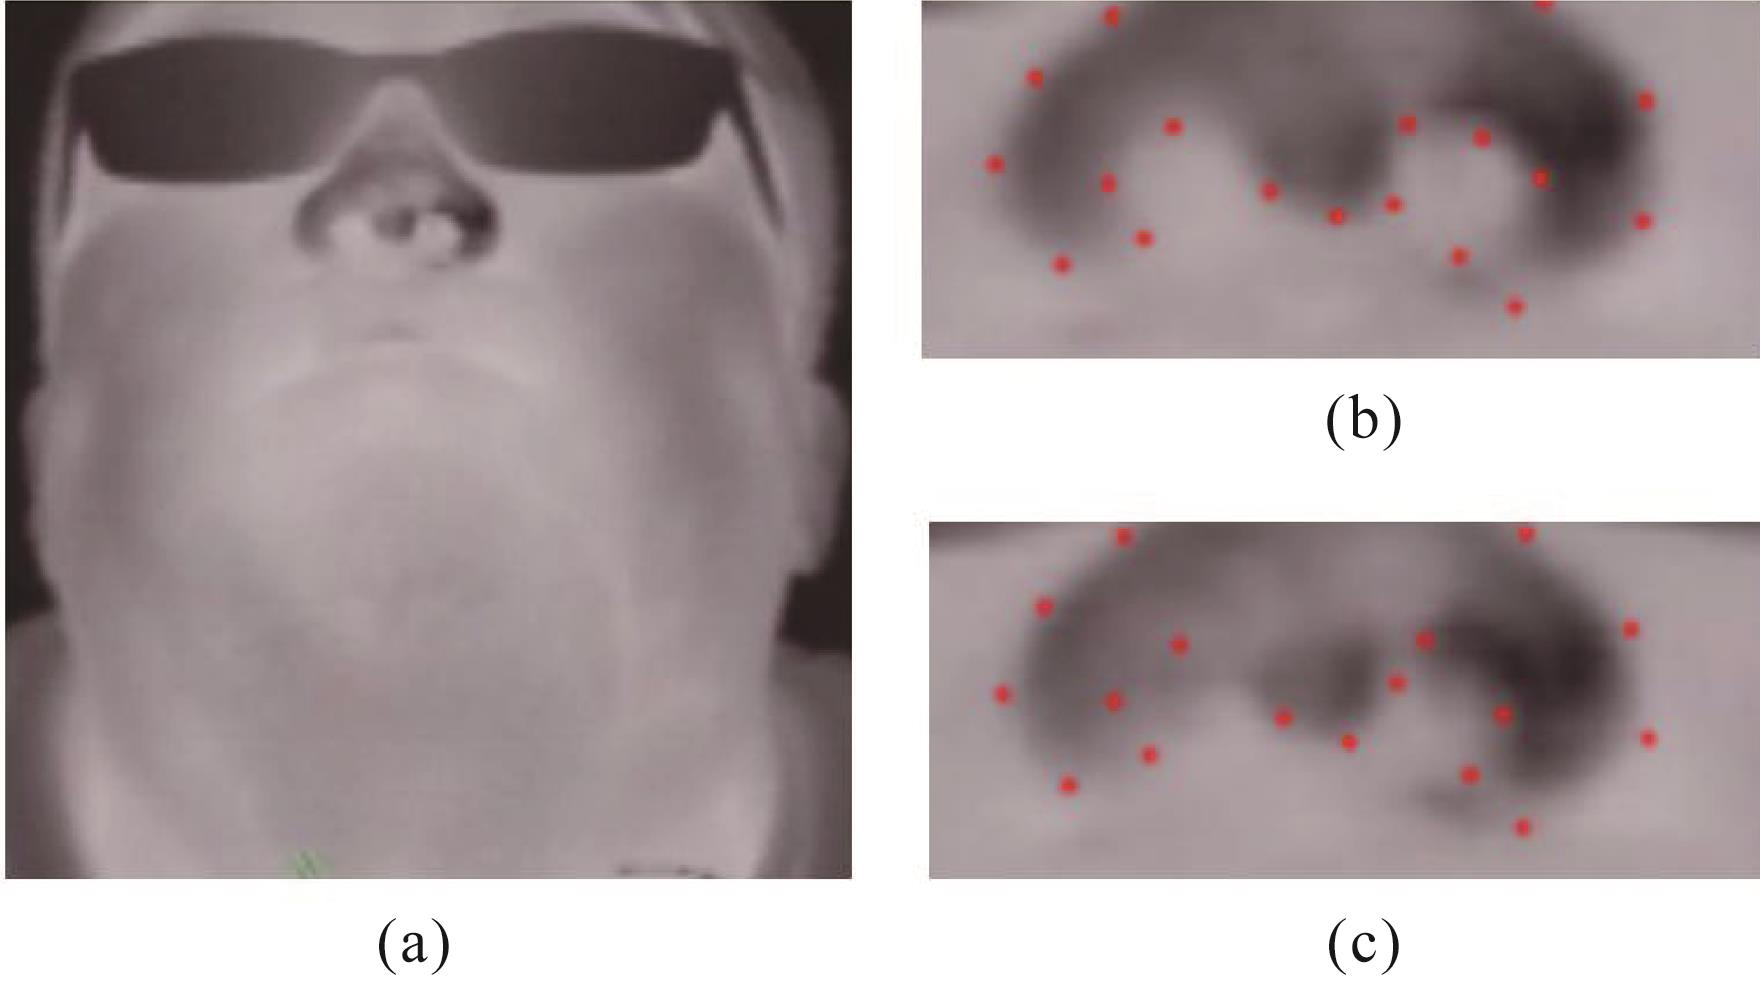 IR thermography for monitoring respiration （a） the features of nostril with exhalation, （c） the features of nostril with inhalation